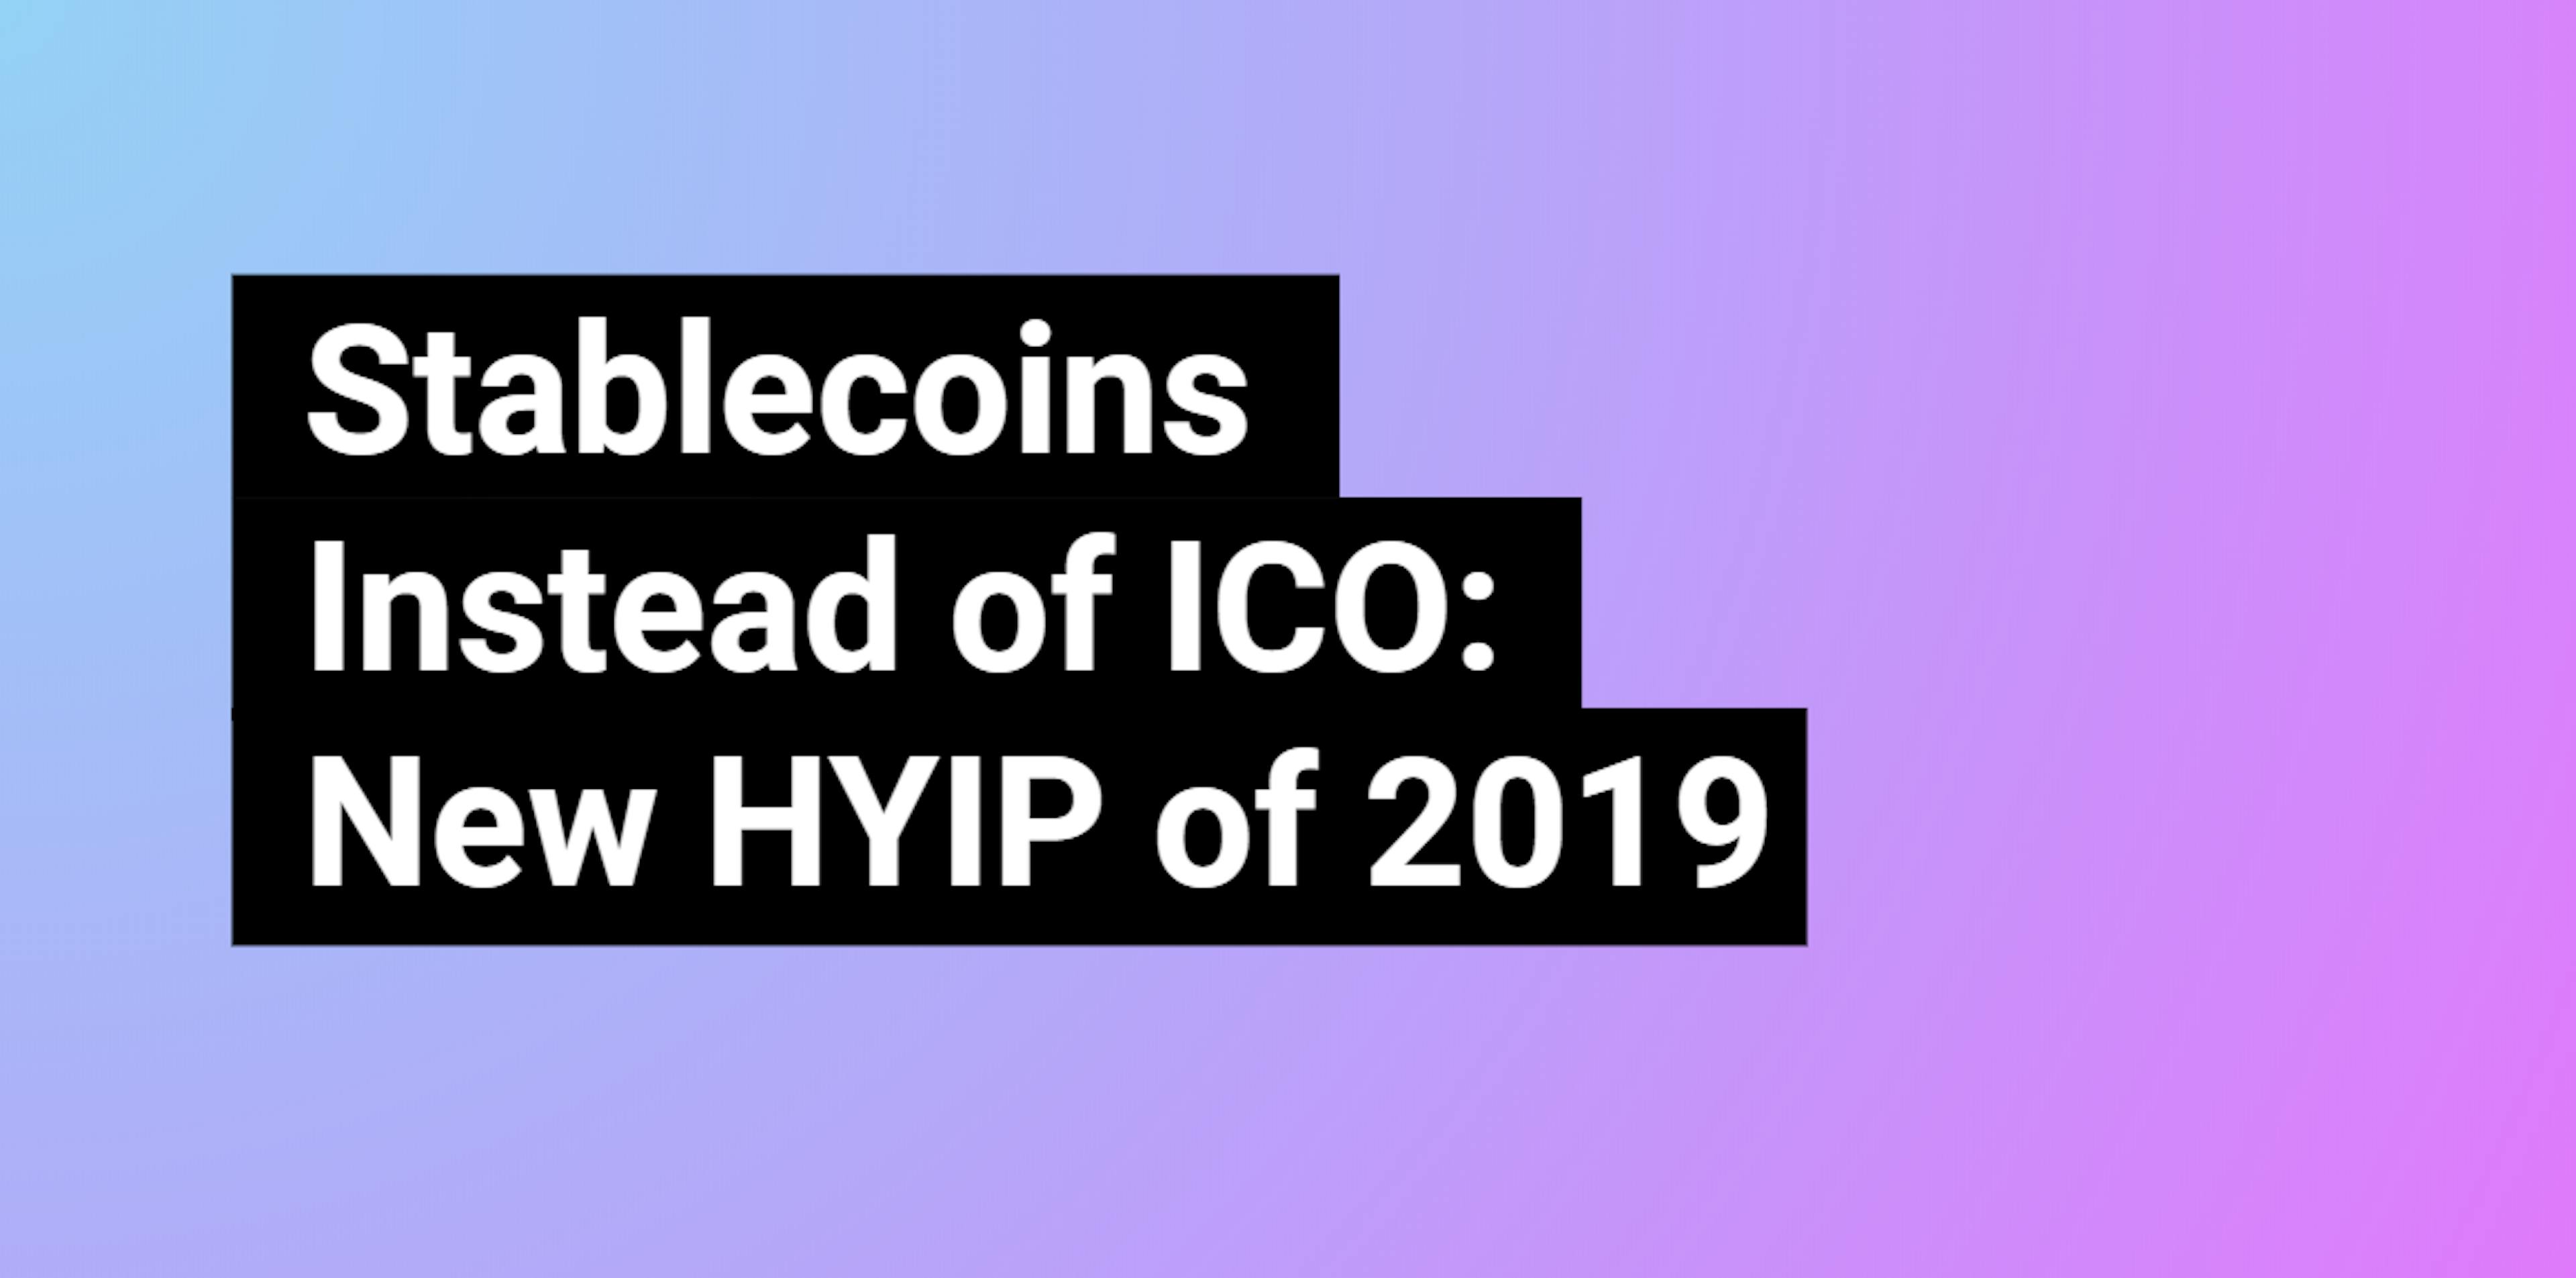 featured image - Stablecoins Instead of ICO: New HYIP of 2019